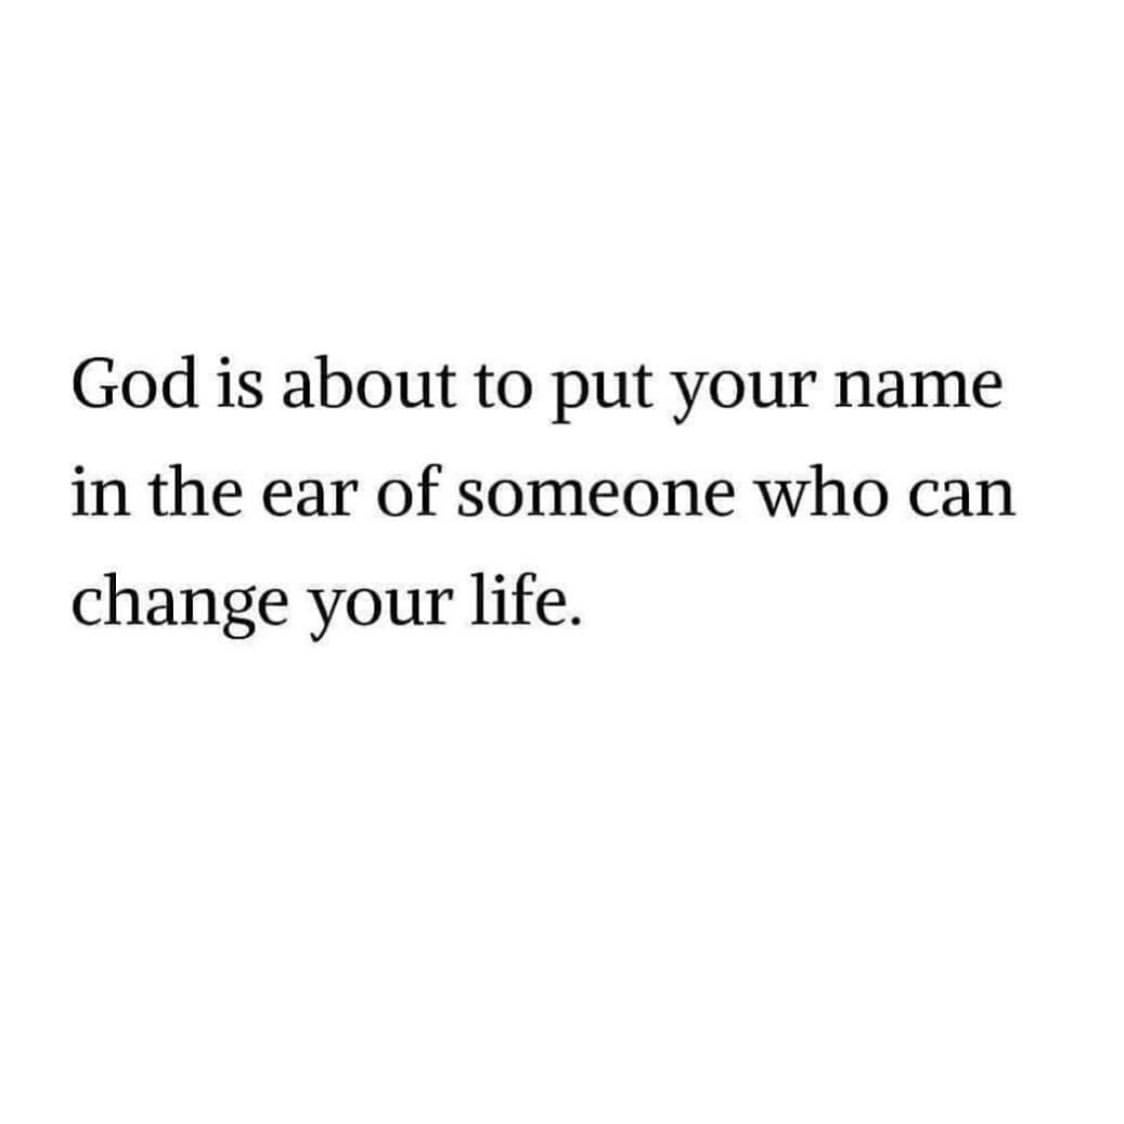 God is about to put your name in the ear of someone who can change your life.